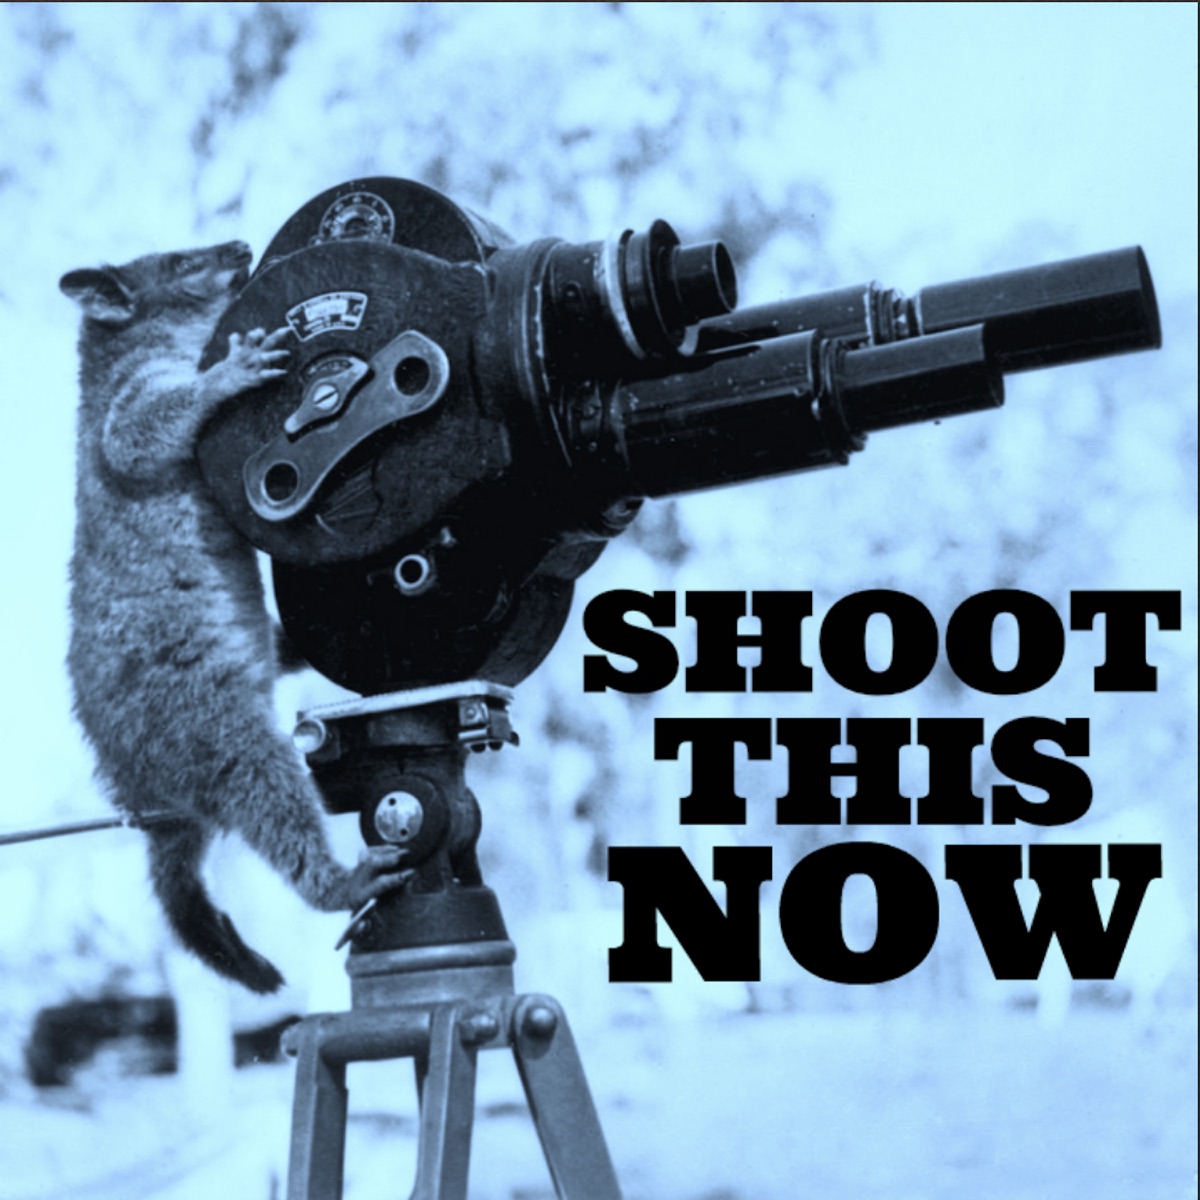 Nudist Land - The Barry Rothbart Nudist Videographer Story â€“ Shoot This Now â€“ Podcast â€“  Podtail